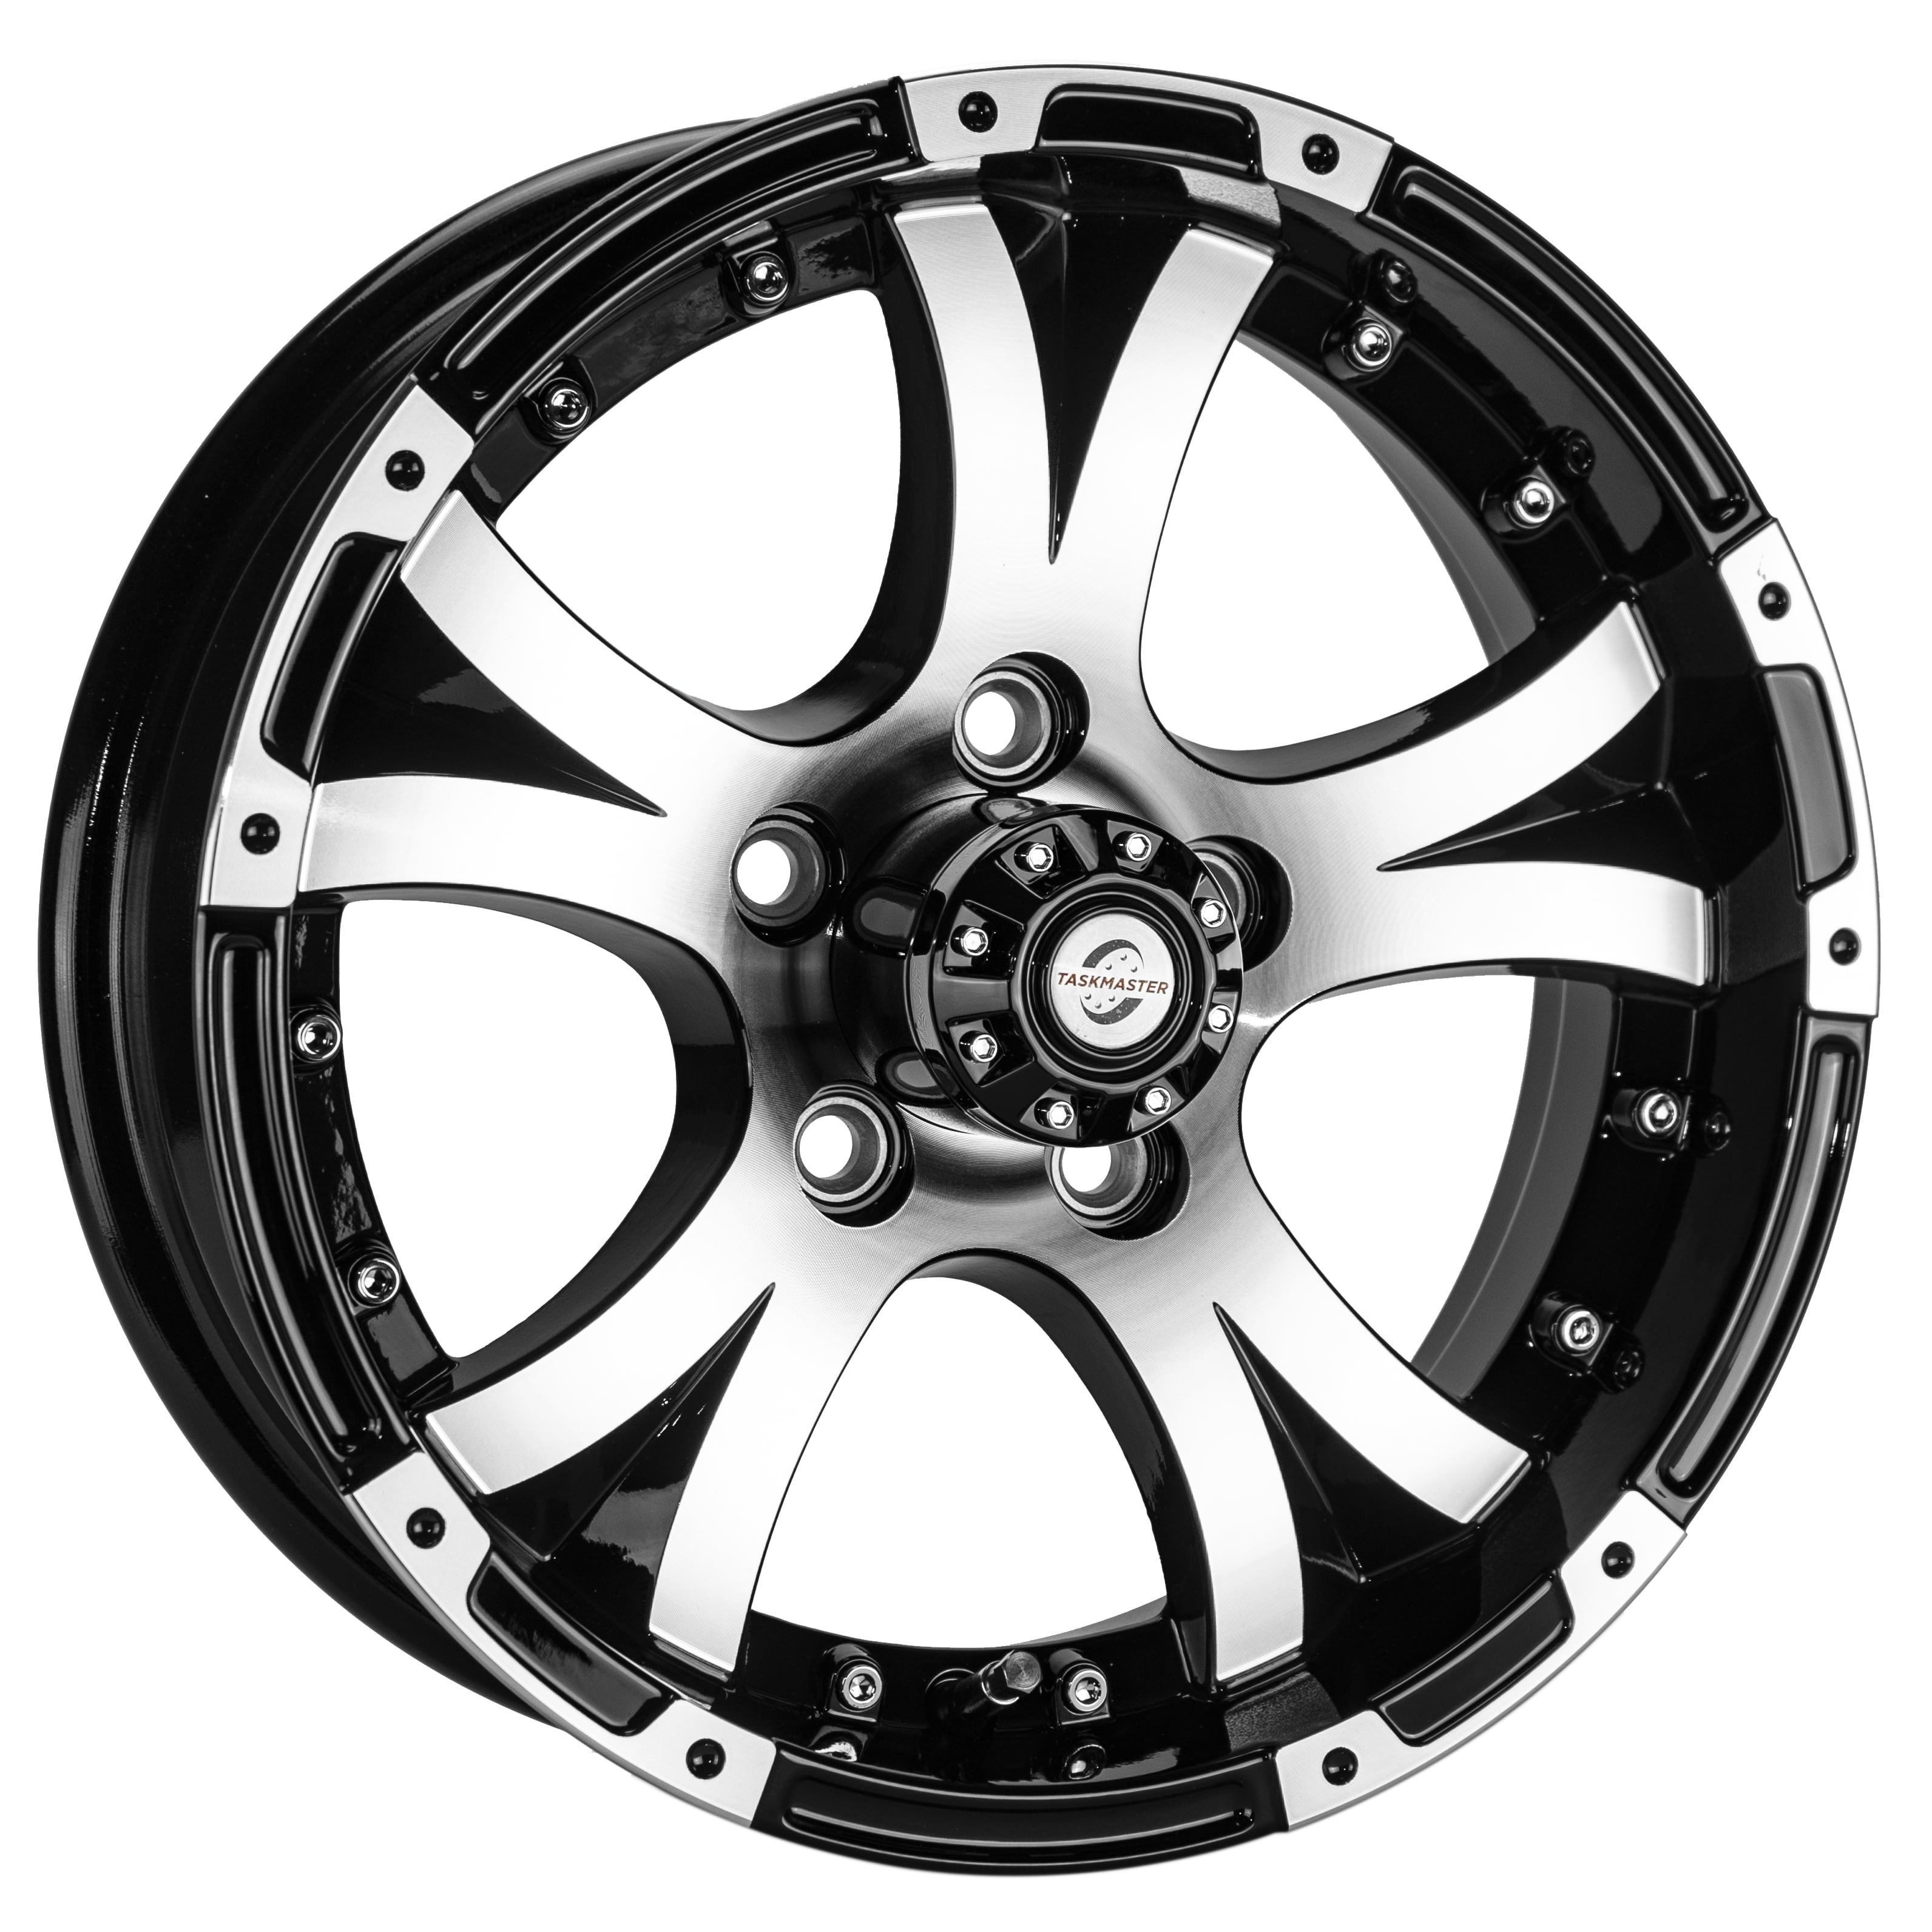 0 Offset-Trailer Use Only Viking Series Matte Black Machined Face & Lip Aluminum Trailer Wheel with Cap 16 x 6 6 On 5.5-4.25 CB 3540 LB Load Carrying Capacity 